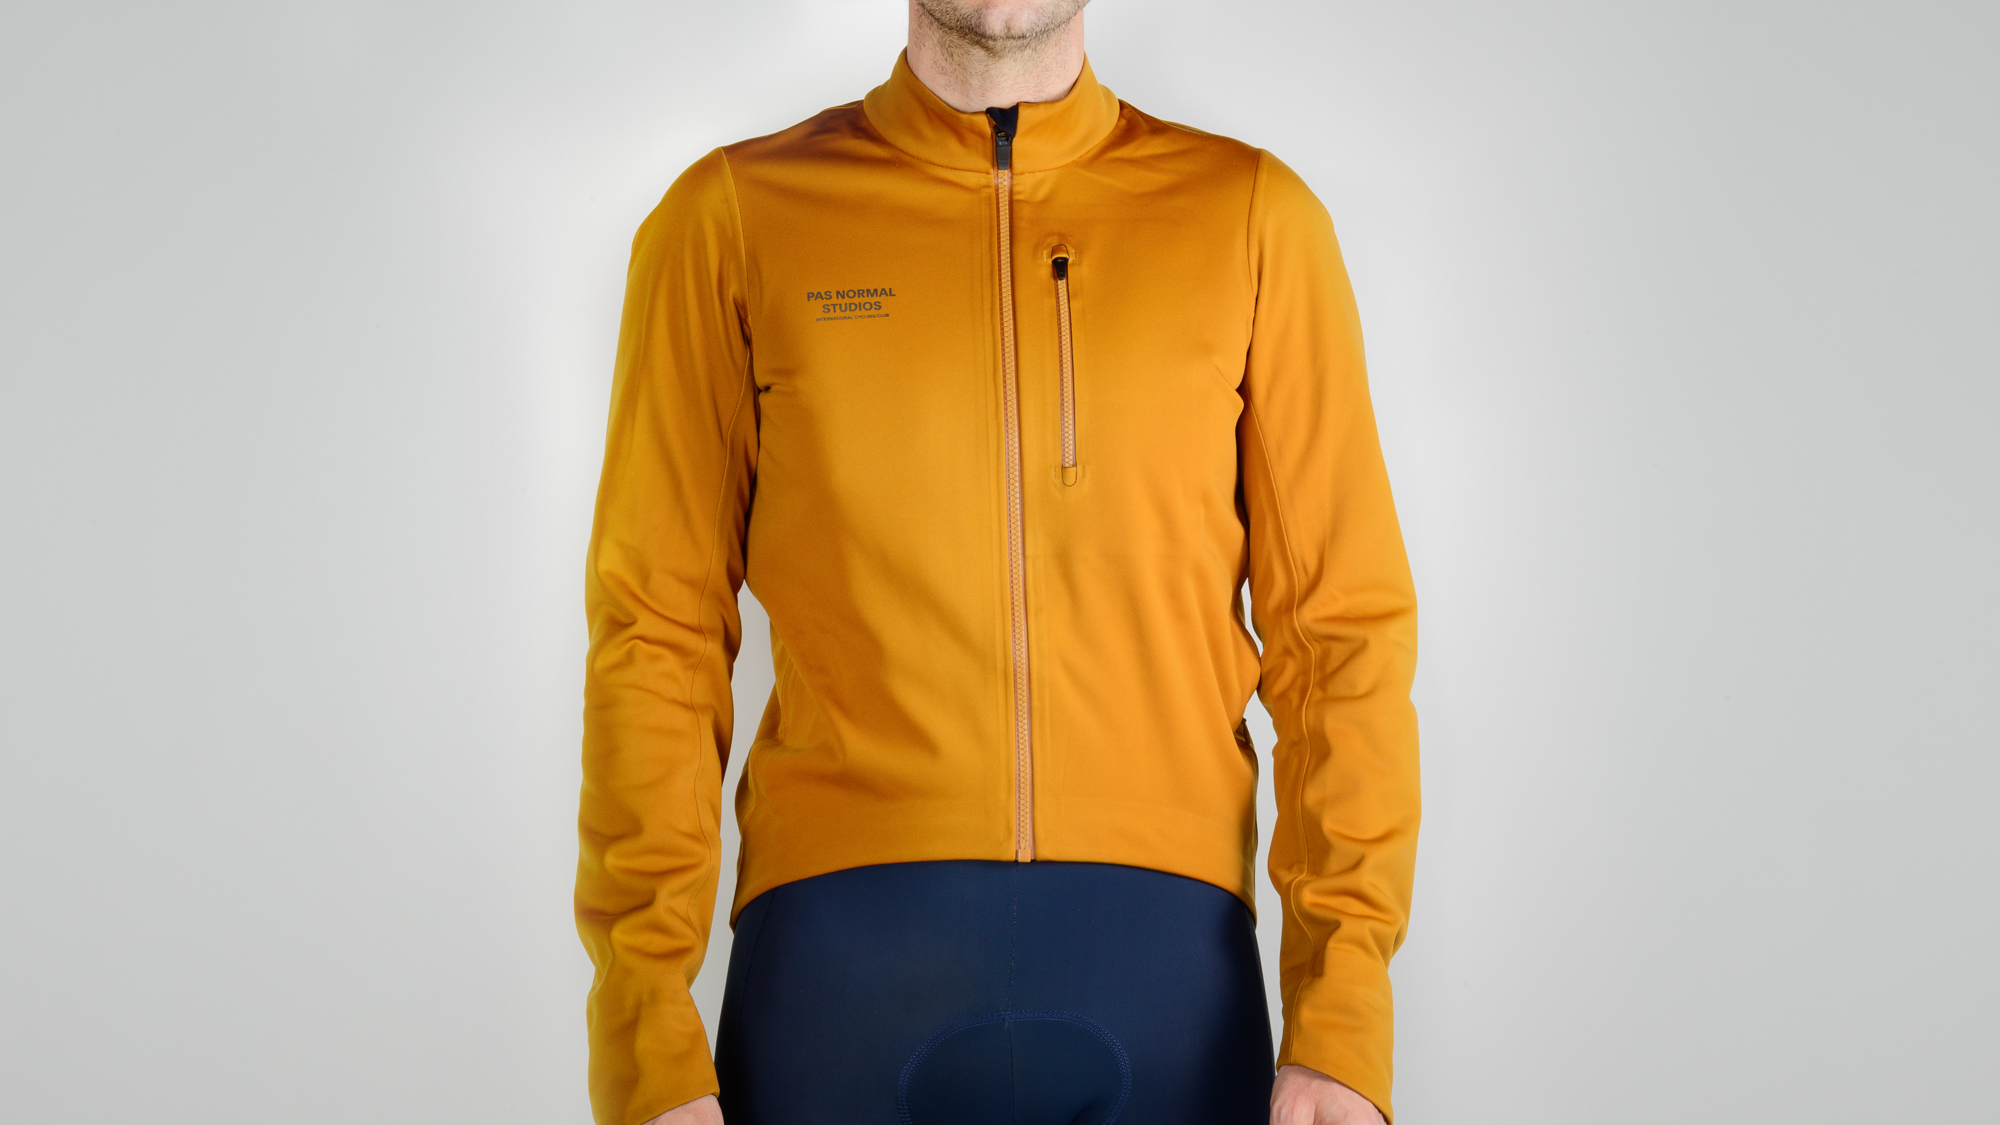 PAS Normal Essential Thermal jacket: Perfect all winter as long as it's dry